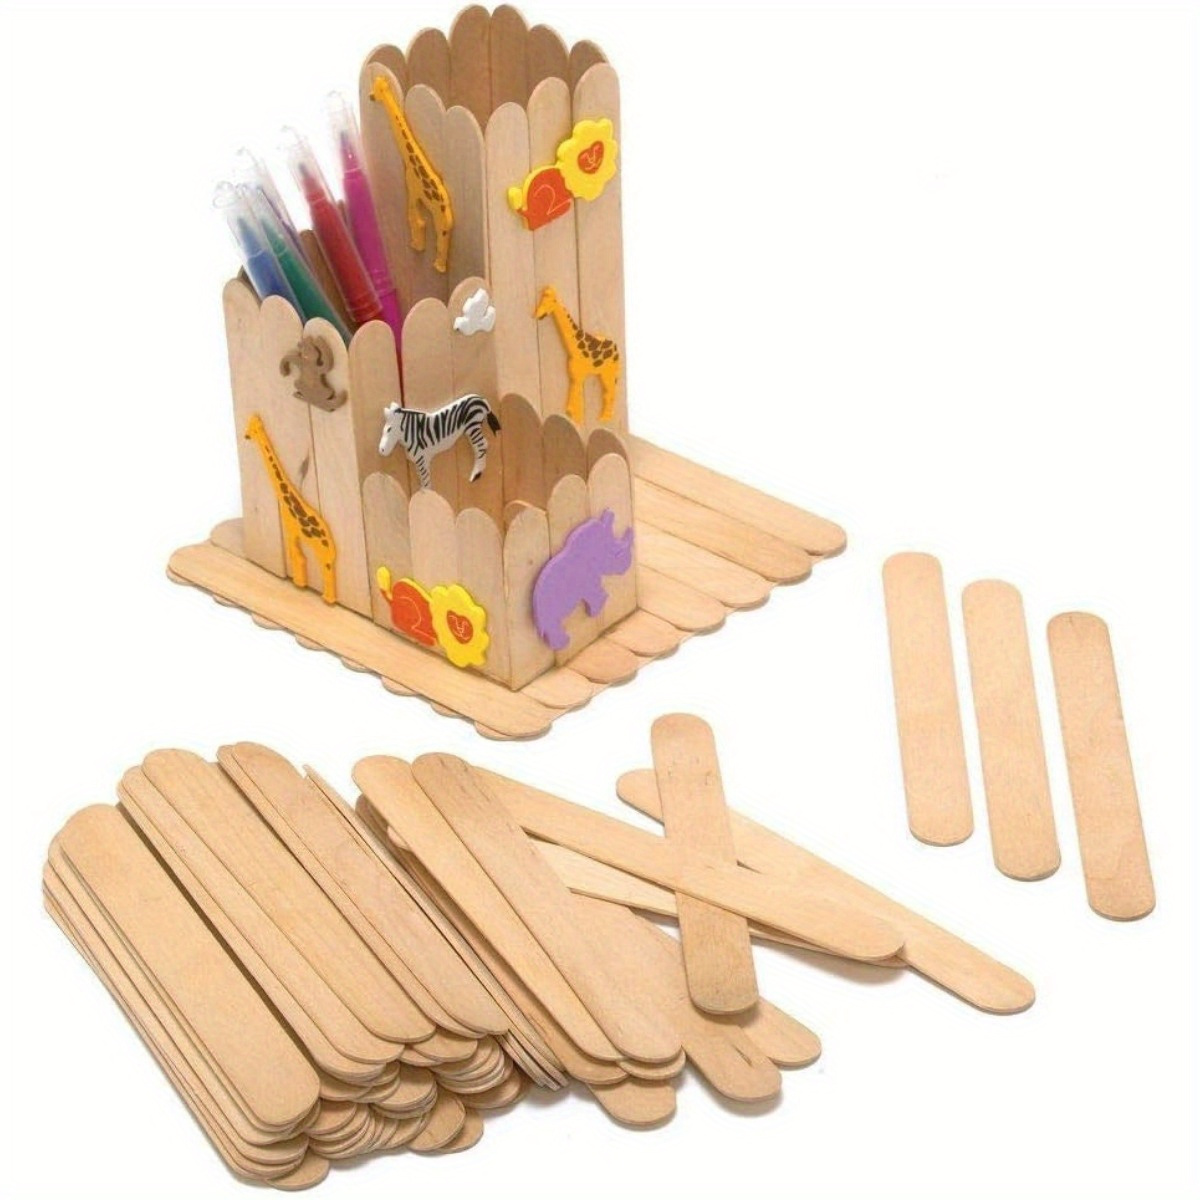 50pcs Colored Popsicle Sticks Natural Wood Craft Sticks Sticks Jumbo  Lollipop Sticks with Holes for Hand Craft Projects - AliExpress